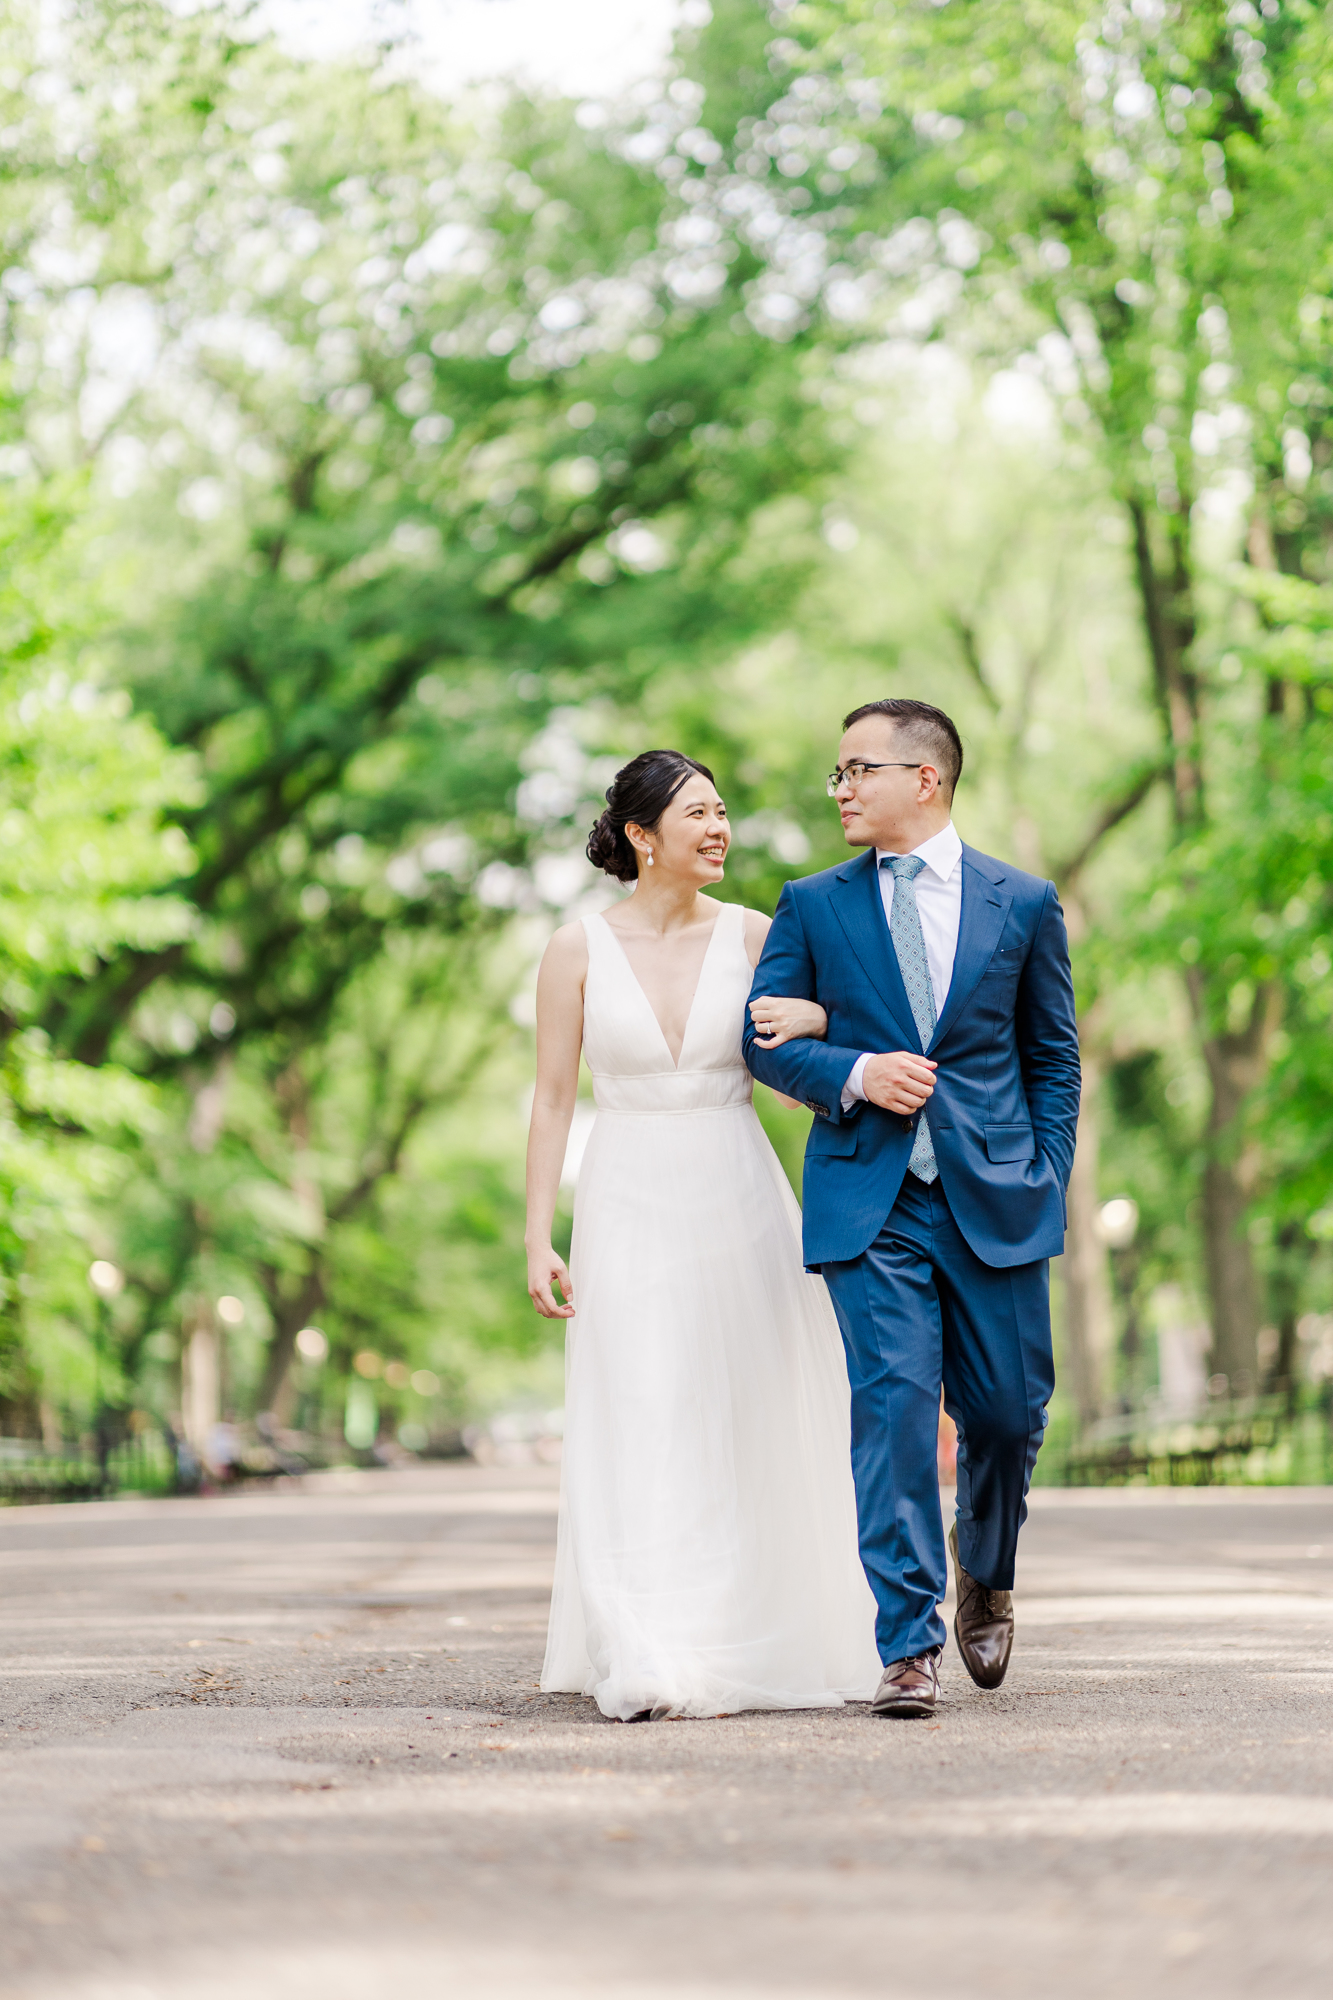 Joyful Elopement Photography in New York\'s DUMBO and Central Park